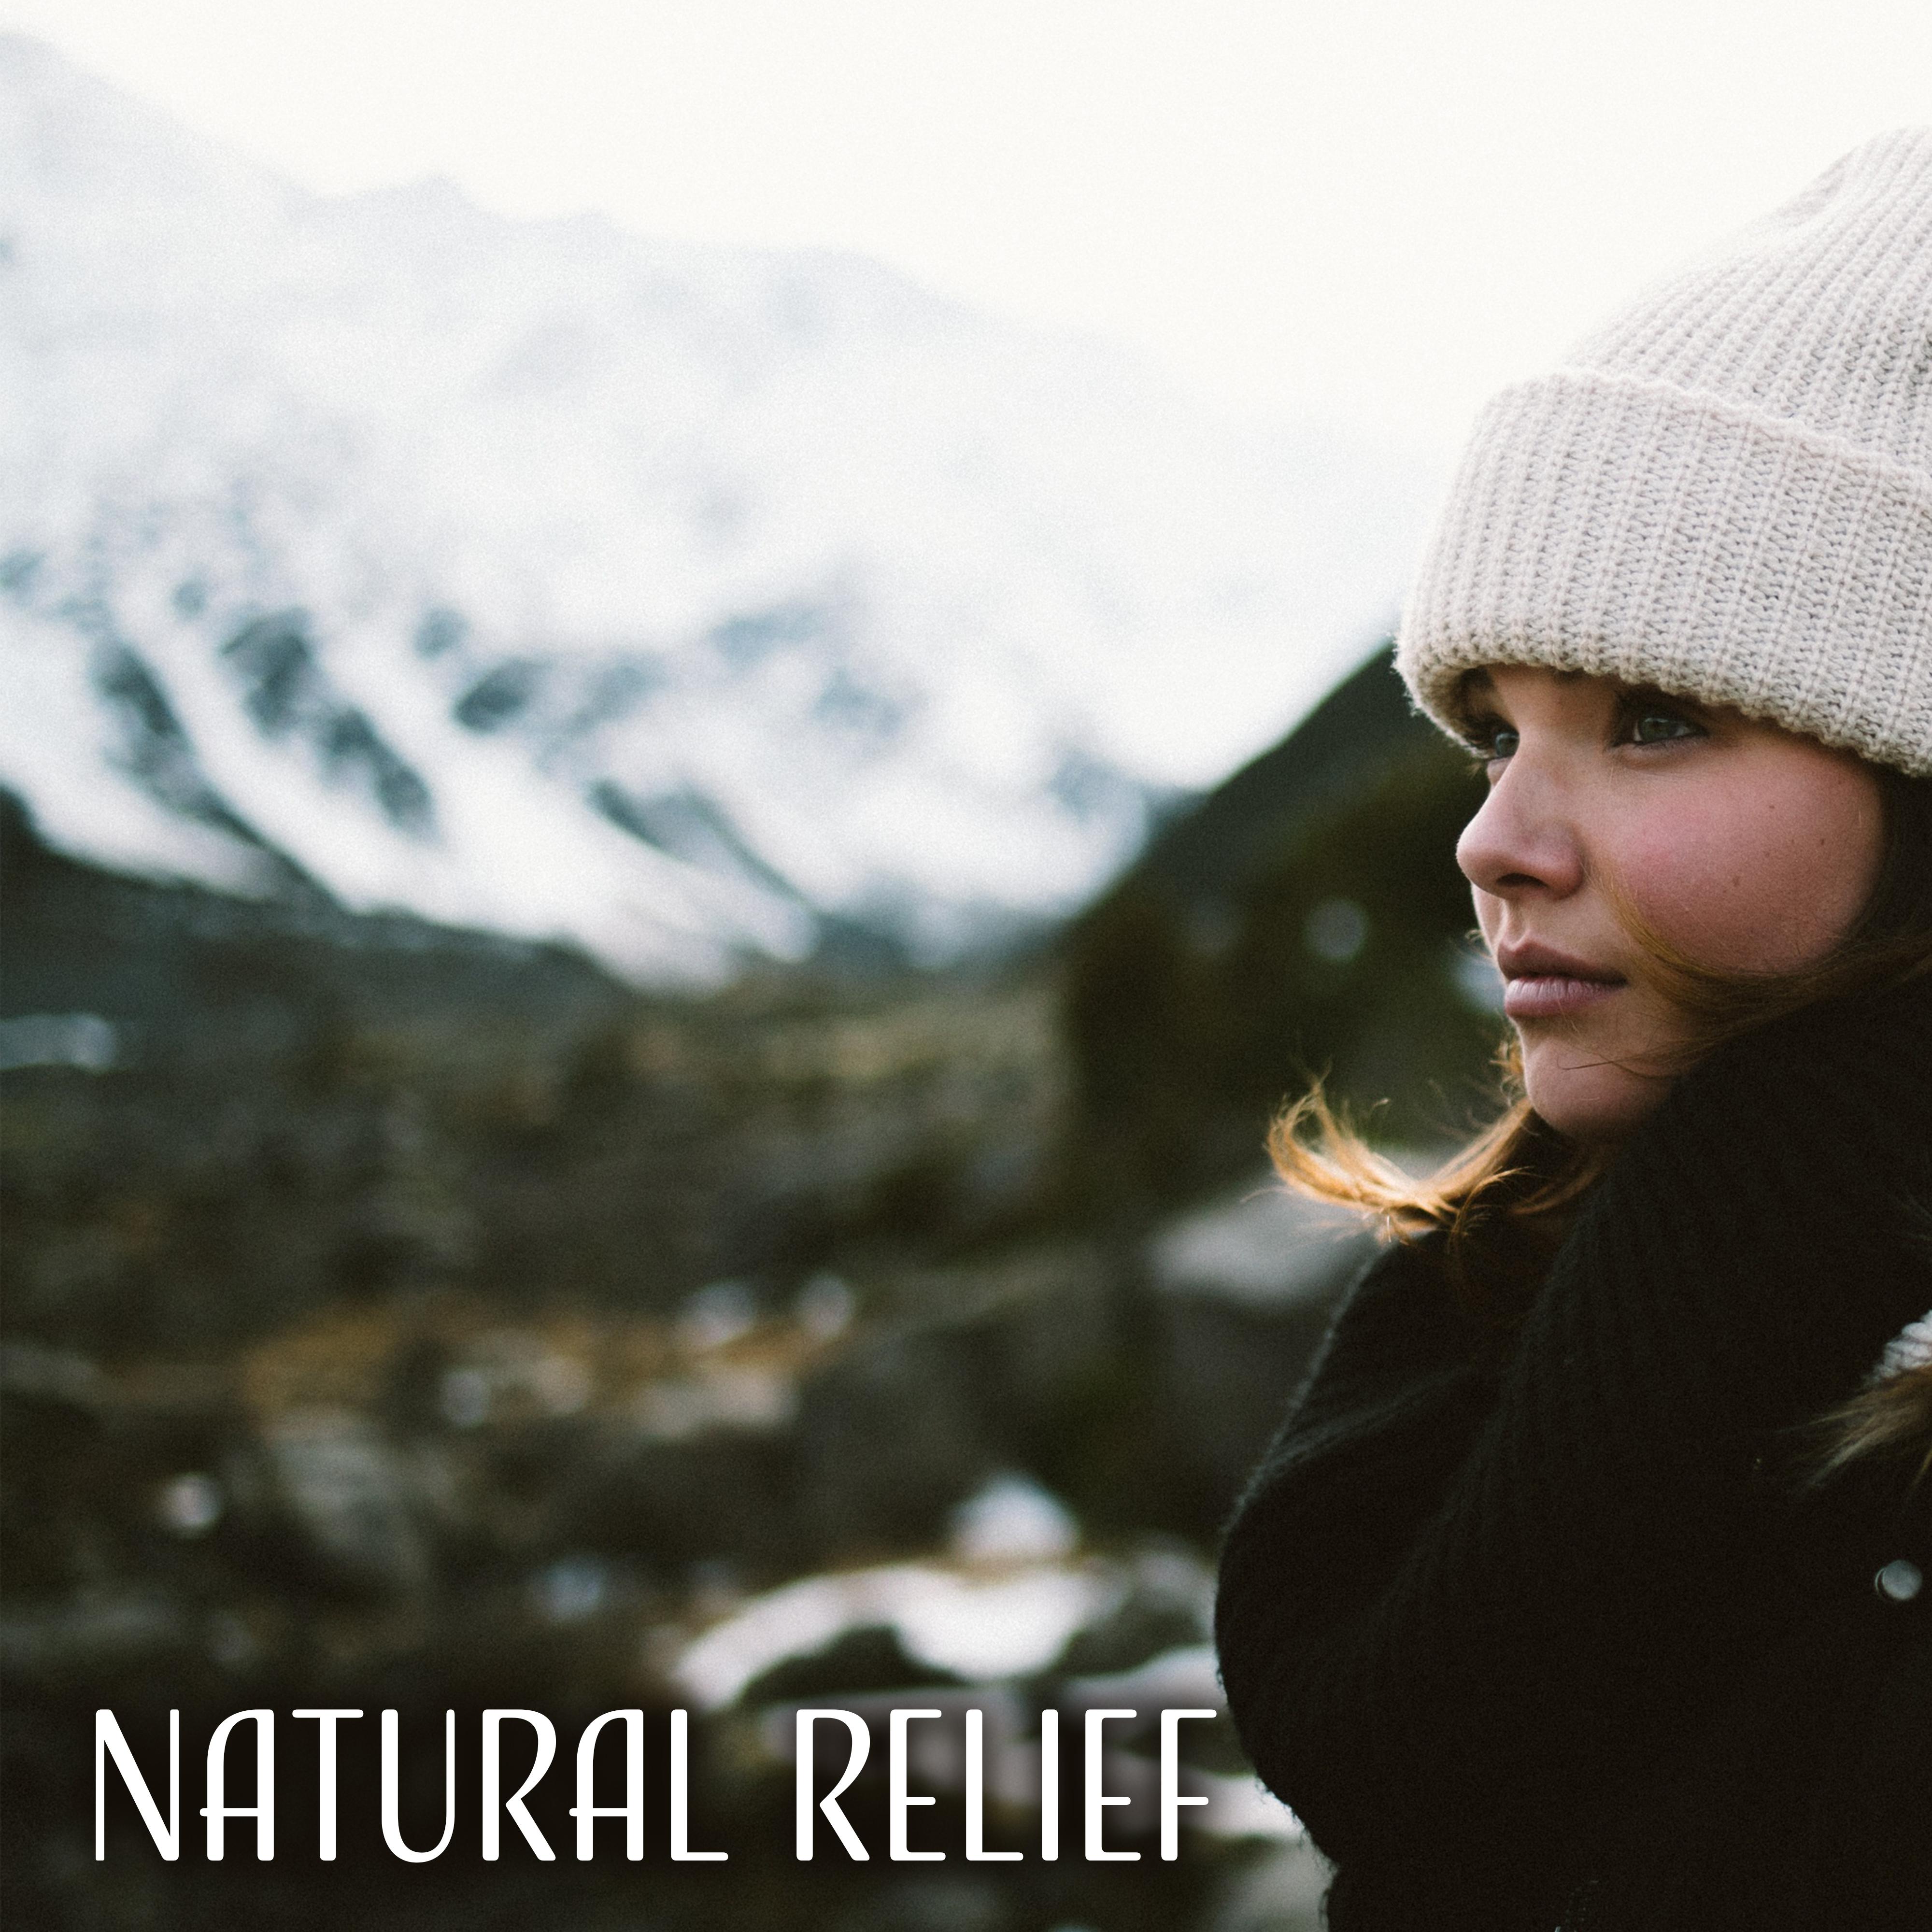 Natural Relief - Relax with Nature, Time to Relax, Relaxation in the House, Sounds of Nature